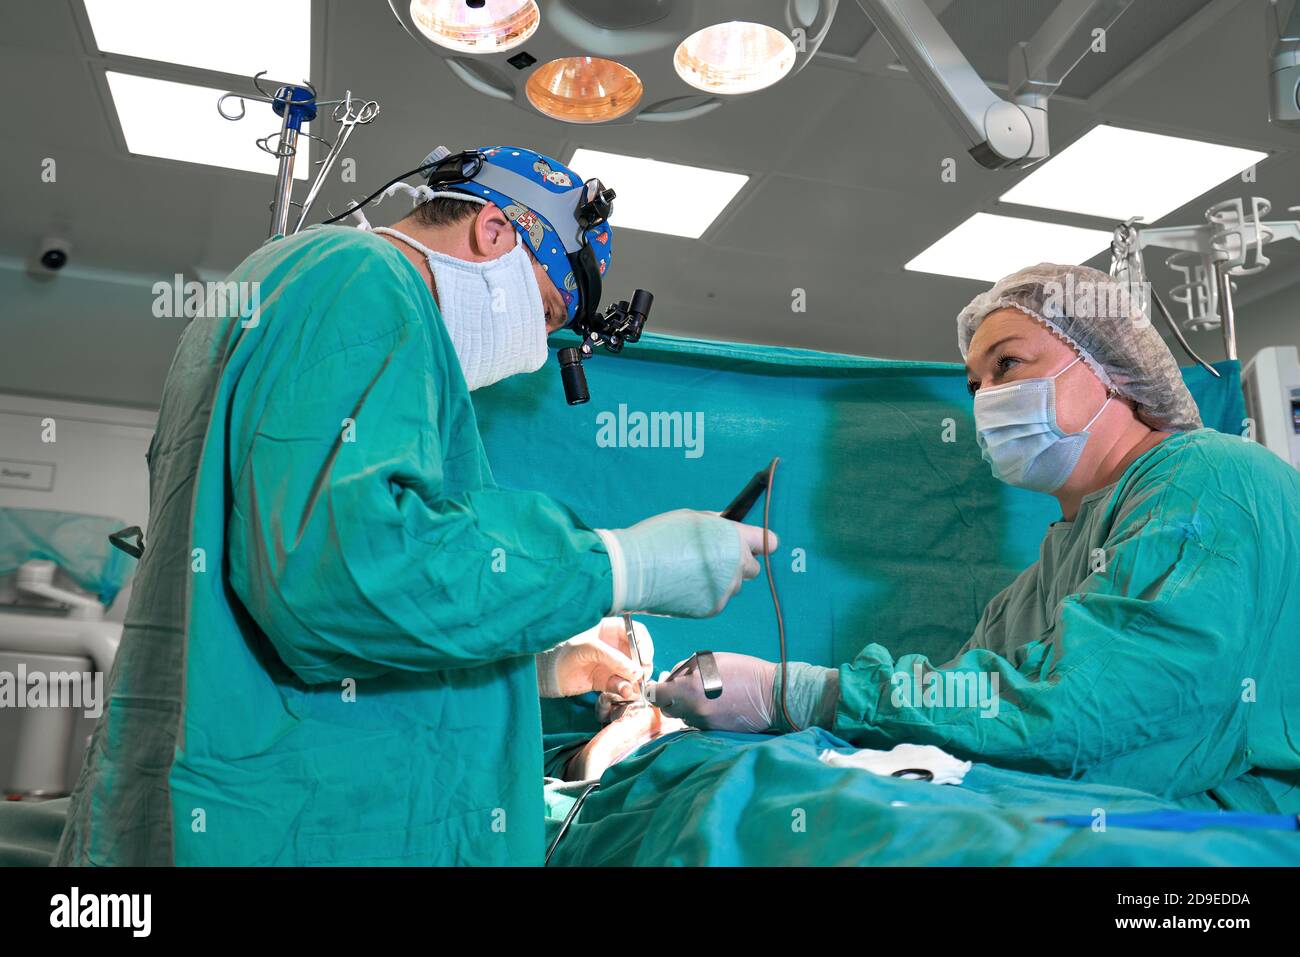 Surgeon and his assistant performing cosmetic surgery on nose in hospital operating room. Nose reshaping, augmentation. Rhinoplasty. Stock Photo